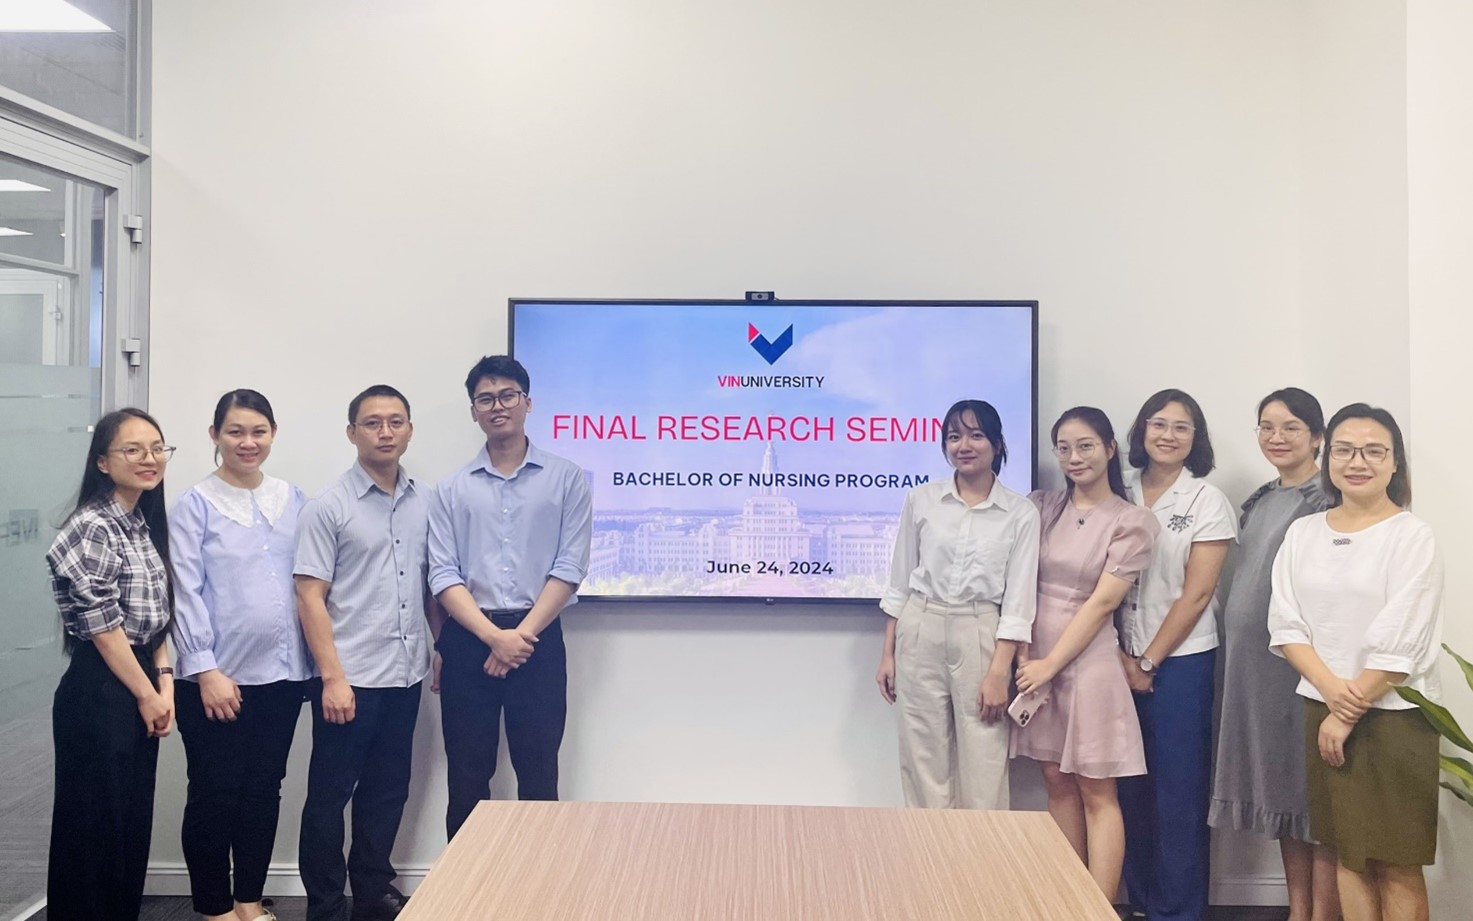 Final Research Seminar: Year 4 Nursing Students’ Research Achievements